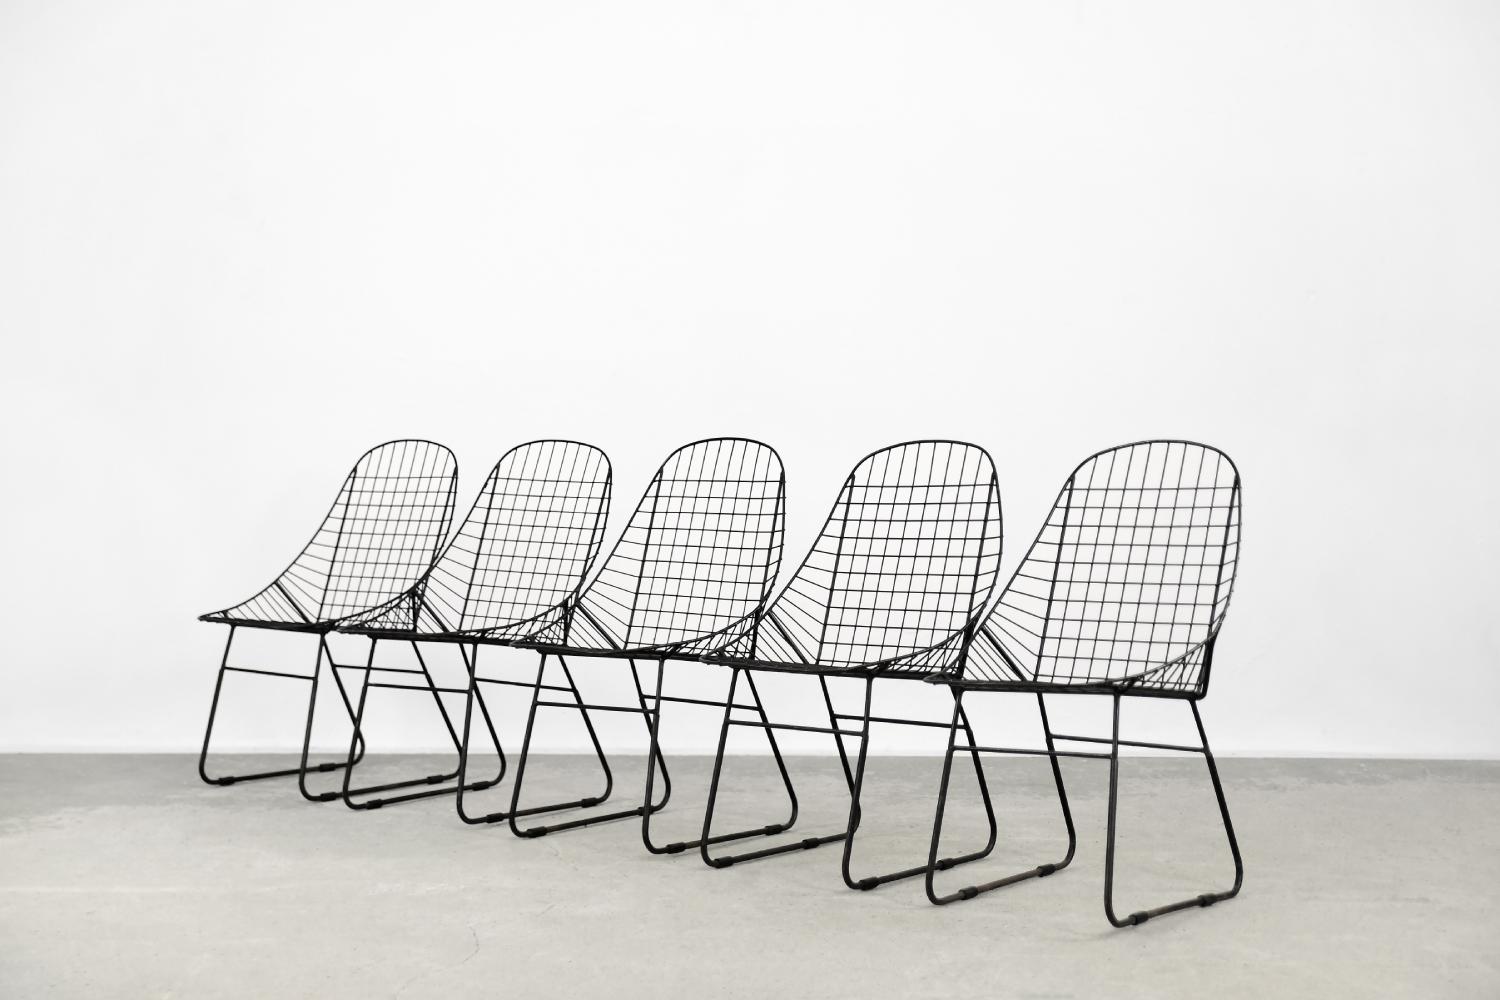 This set of five minimalist chairs was designed during the 1960s. It is probably a prototype made by a Swedish manufactory, and the chairs never entered mass production. They have a solid frame made of black coated metal wire. The form refers to the